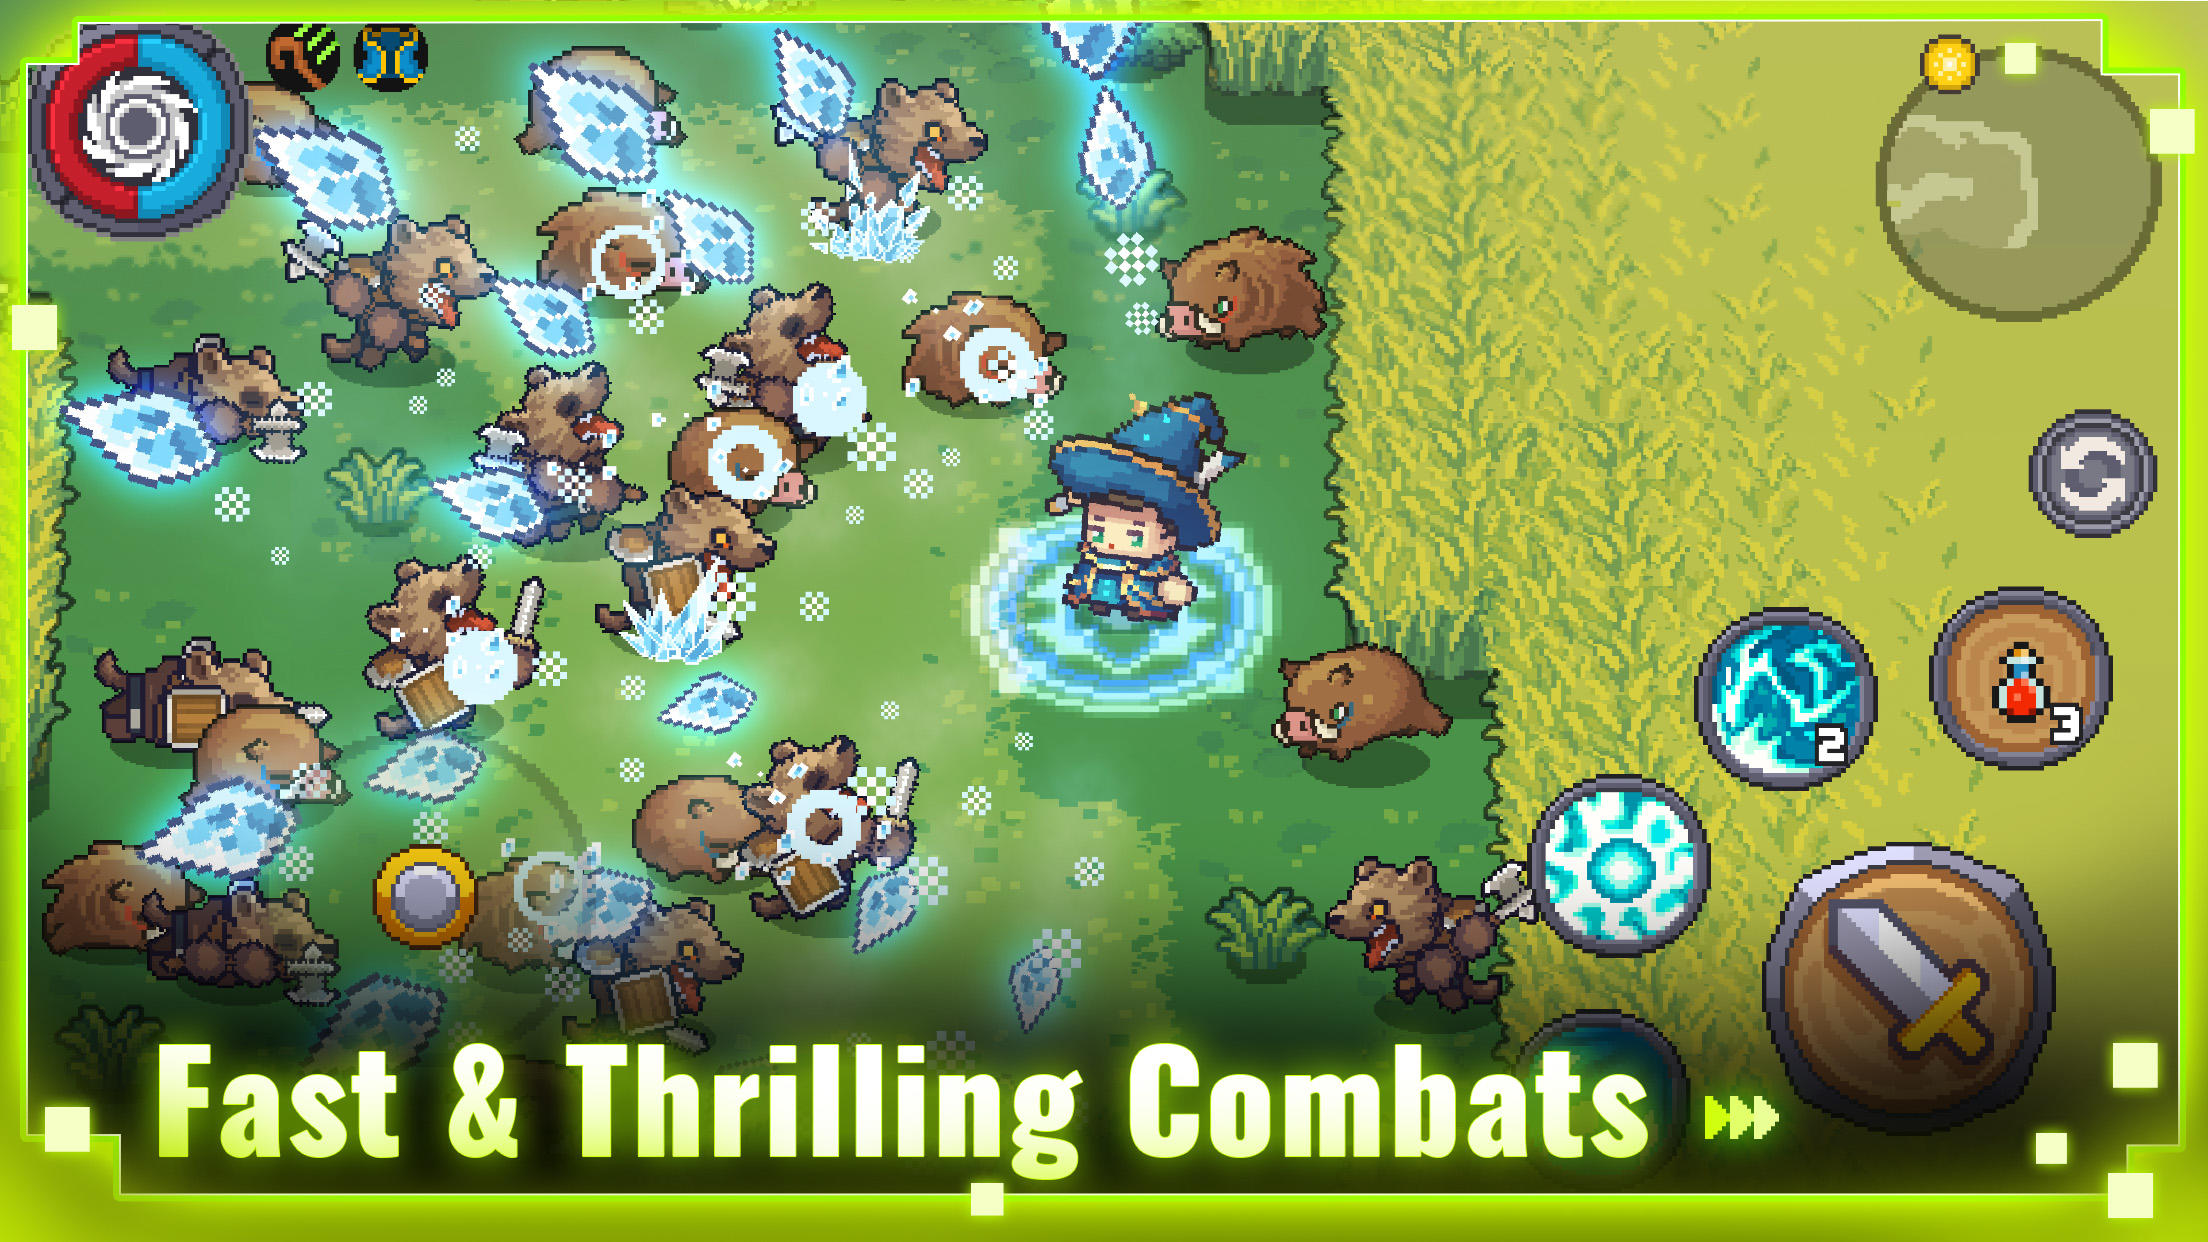 Apple Knight Dungeons for Android - Download the APK from Uptodown